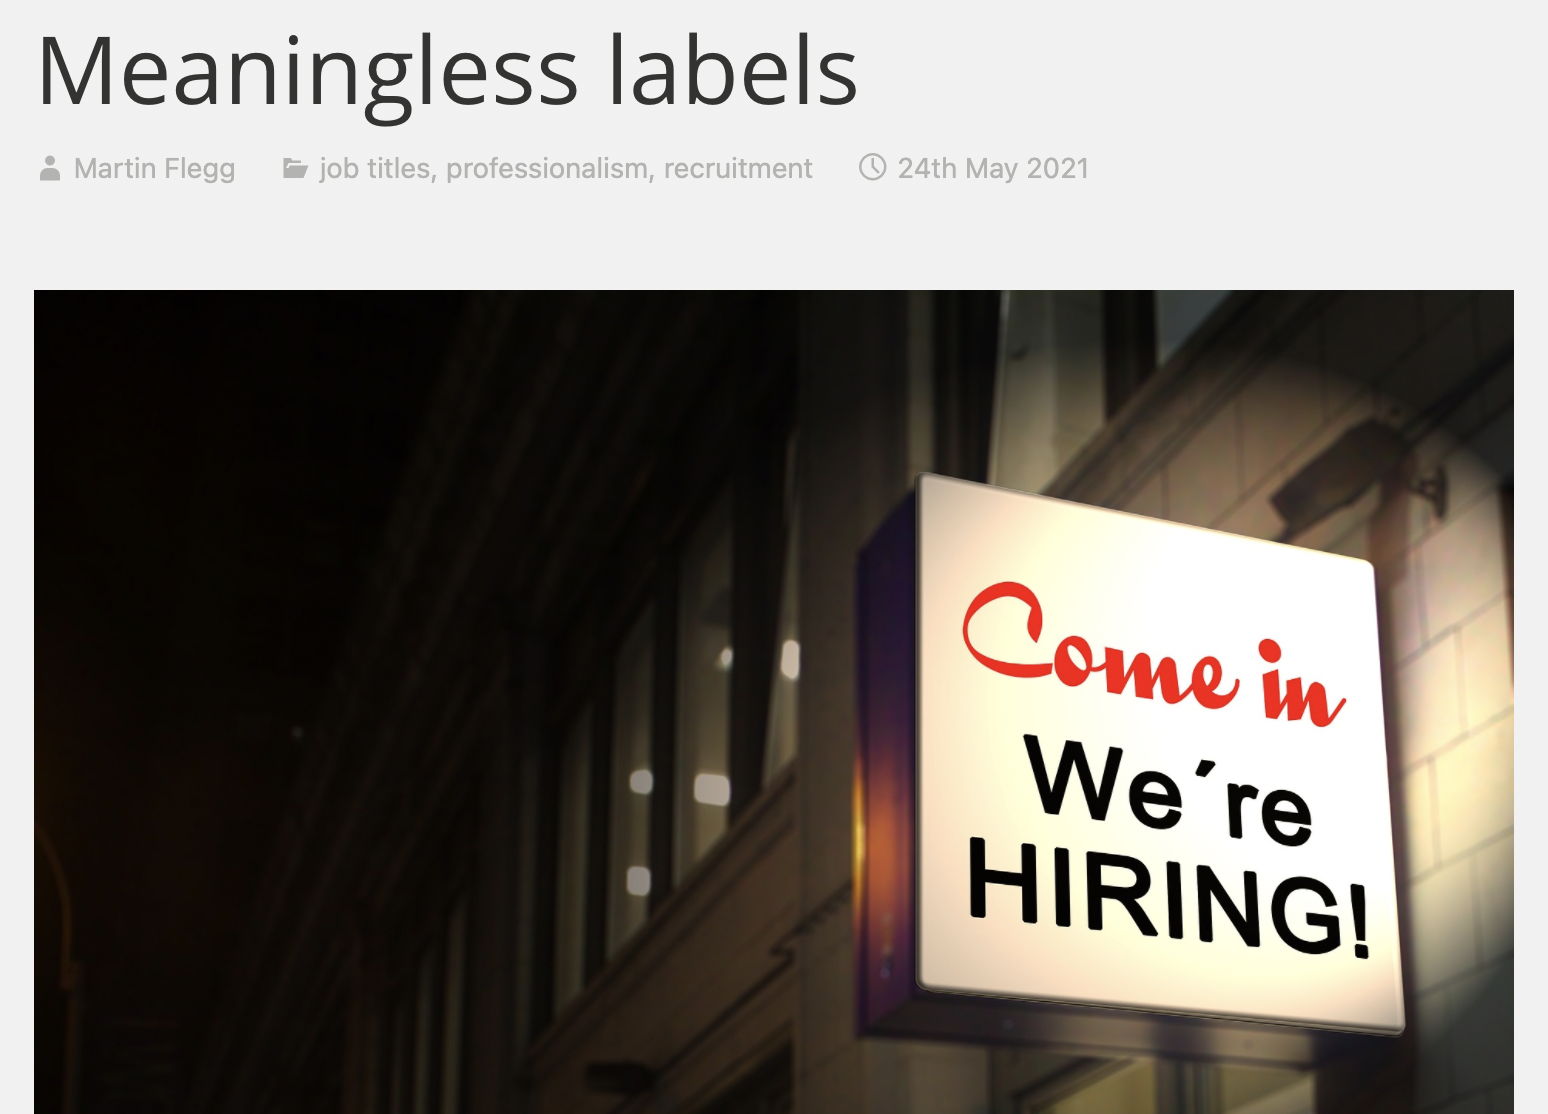 Meaningless labels